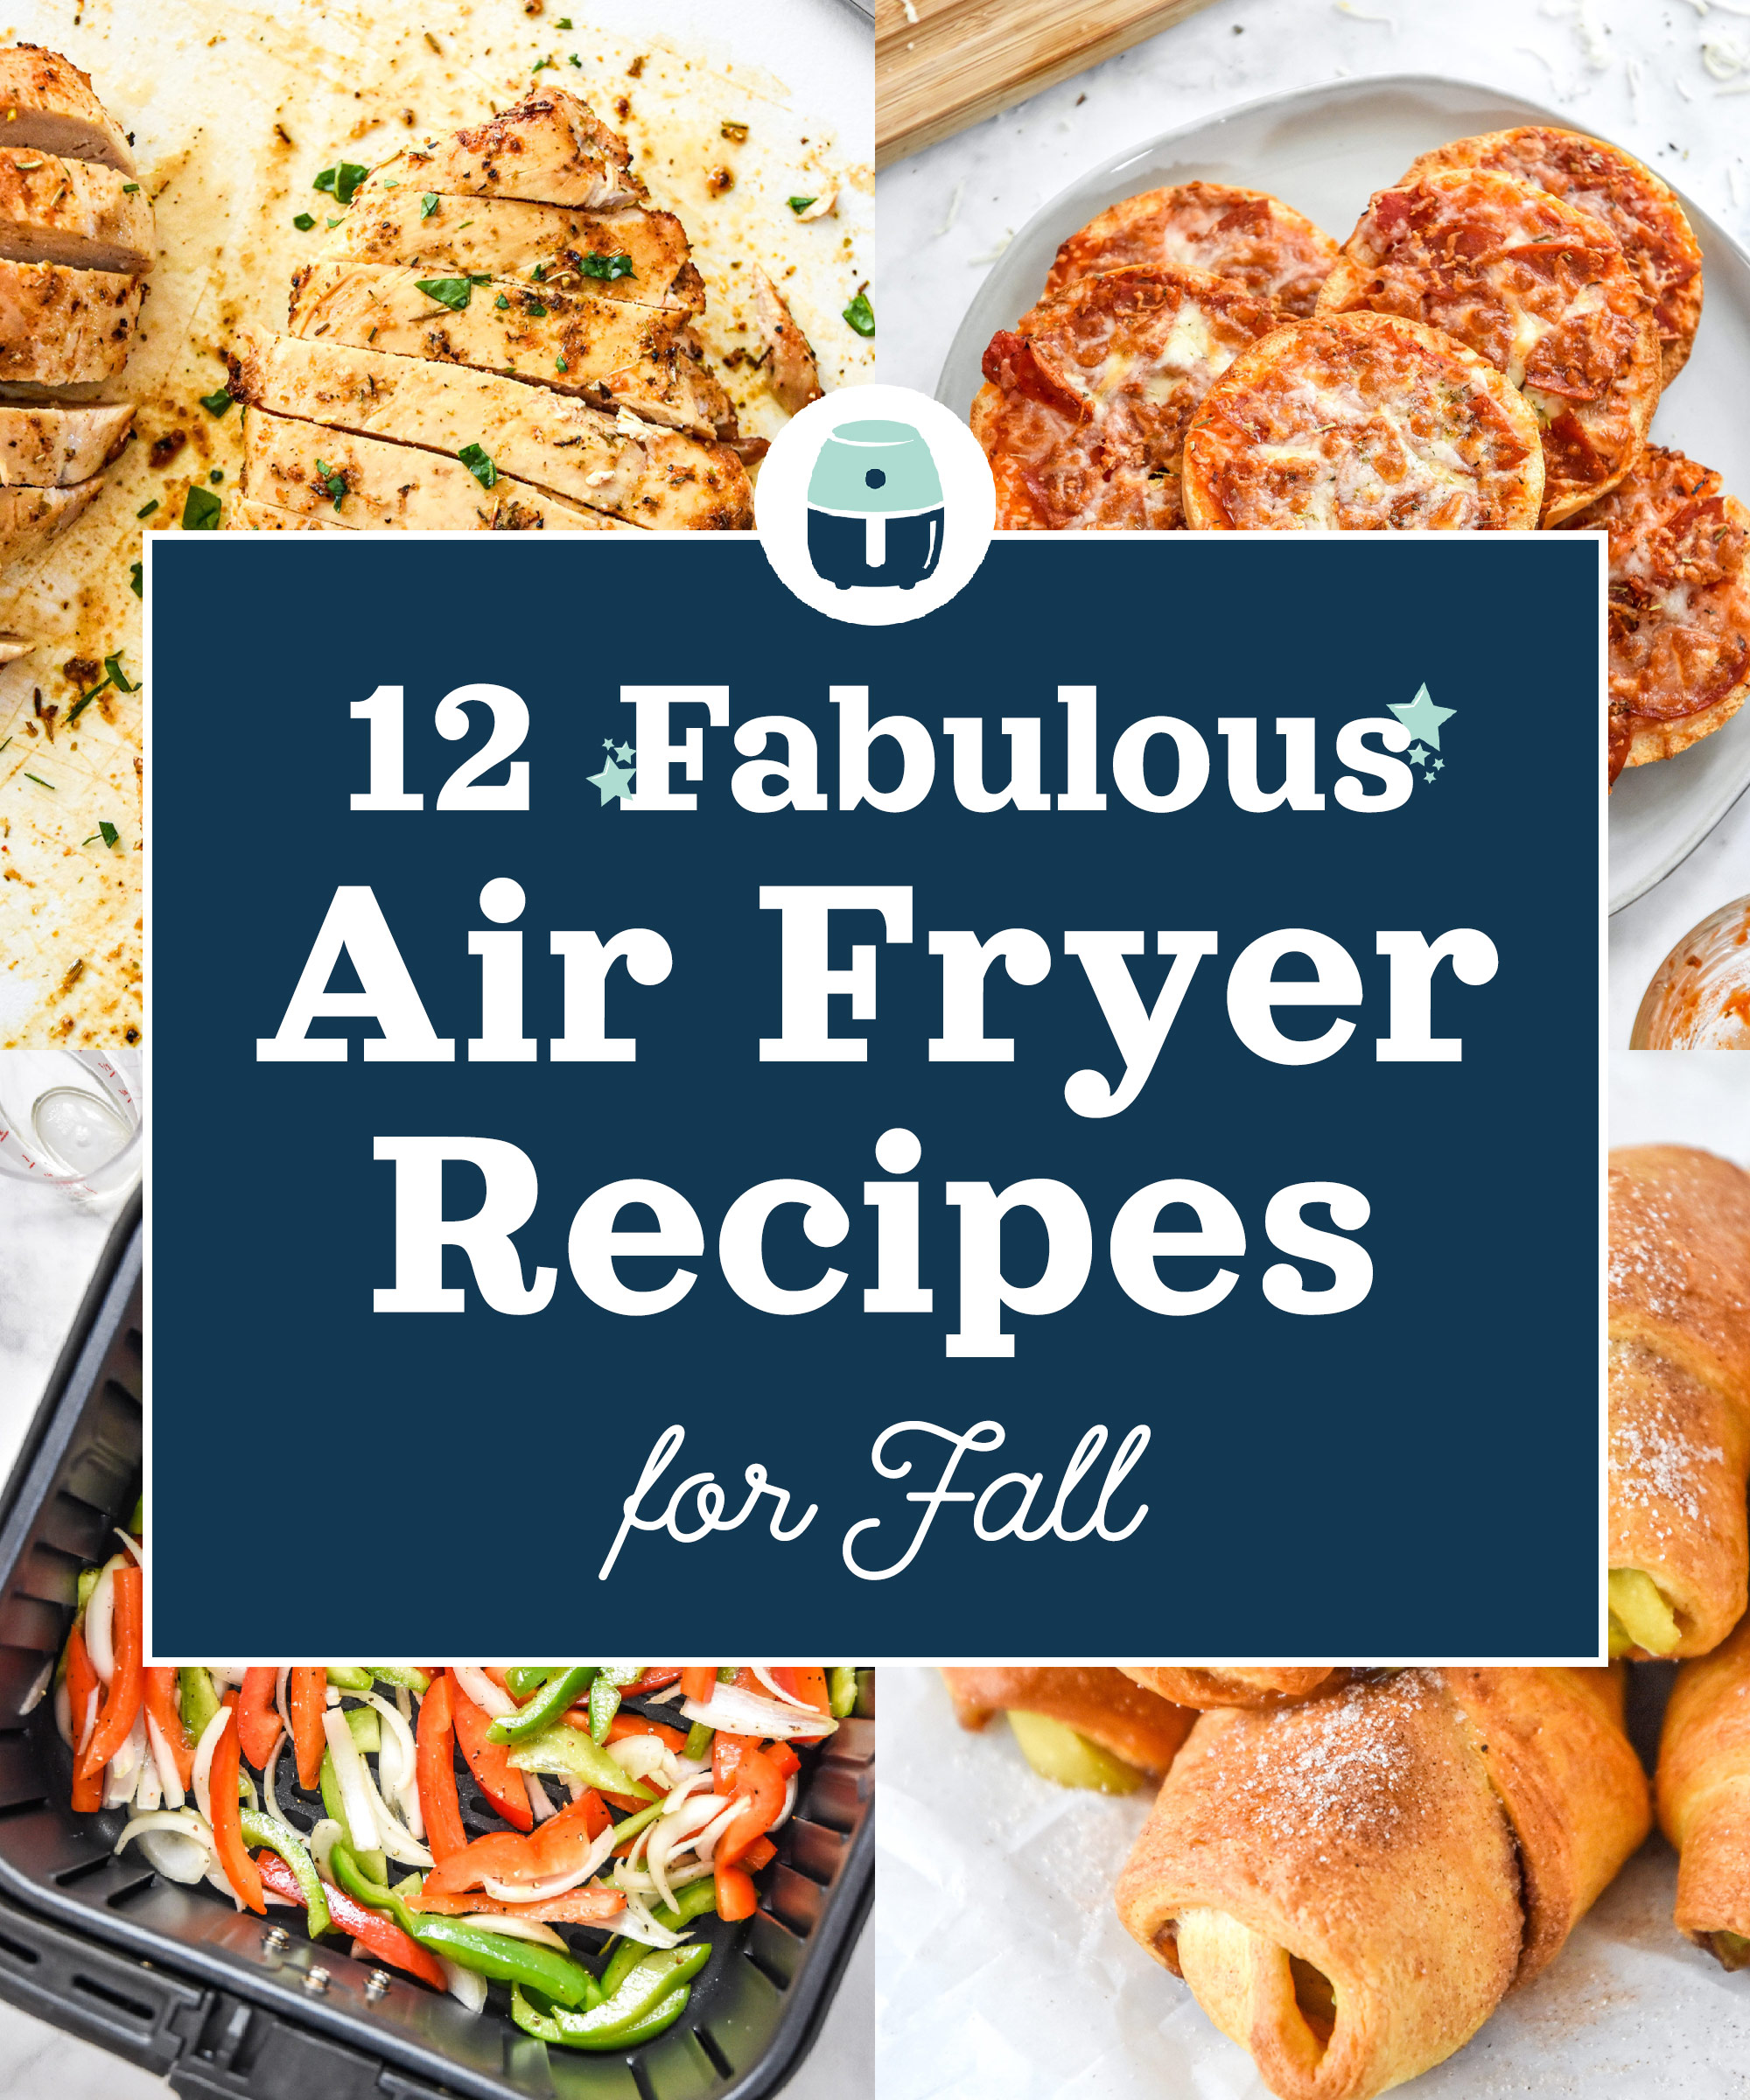 12 Fabulous Air Fryer Recipes for Fall - Project Meal Plan